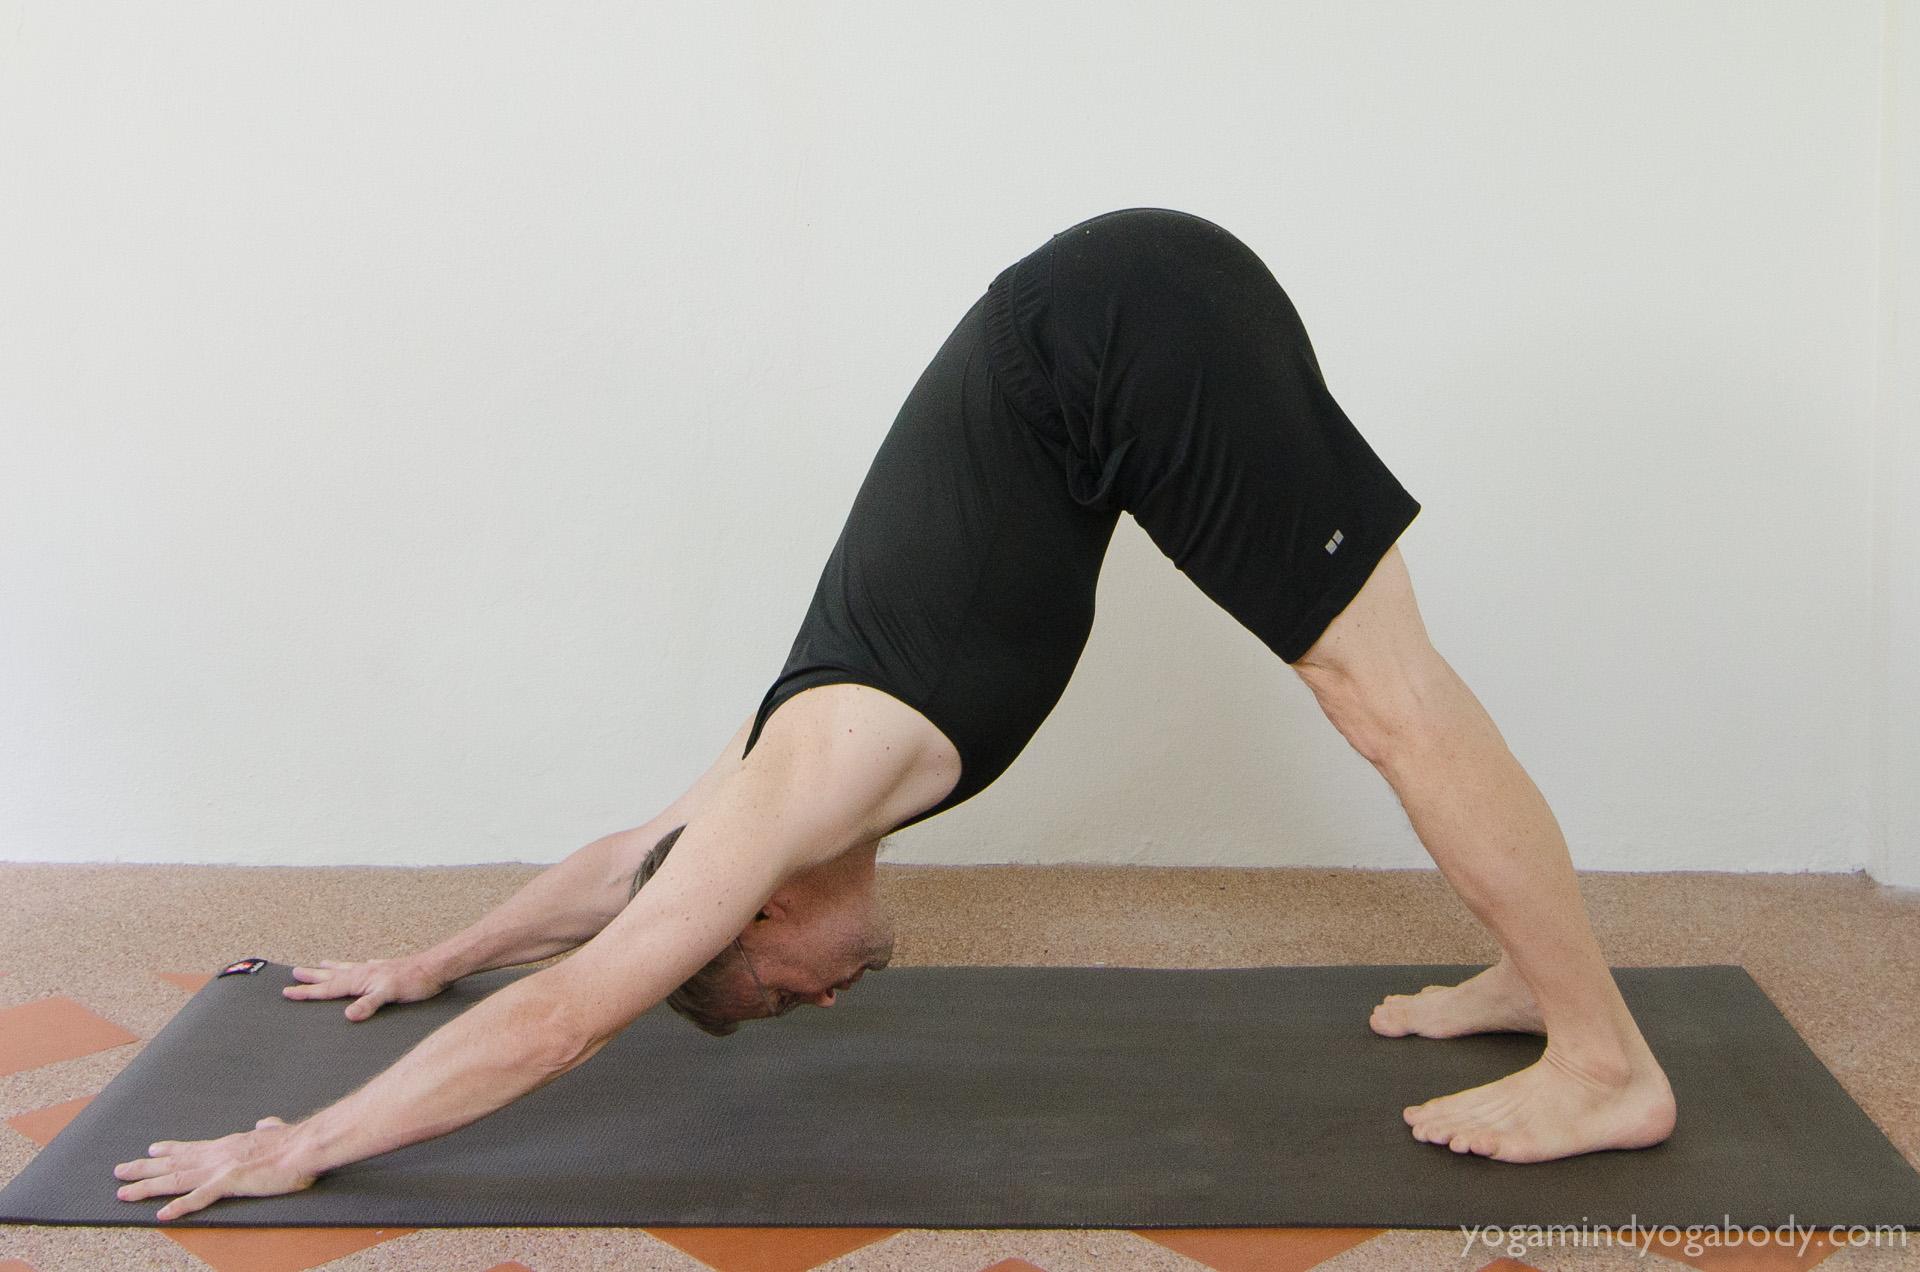 Is There Such a Thing as Perfect Alignment? - Yoga Mind Yoga Body